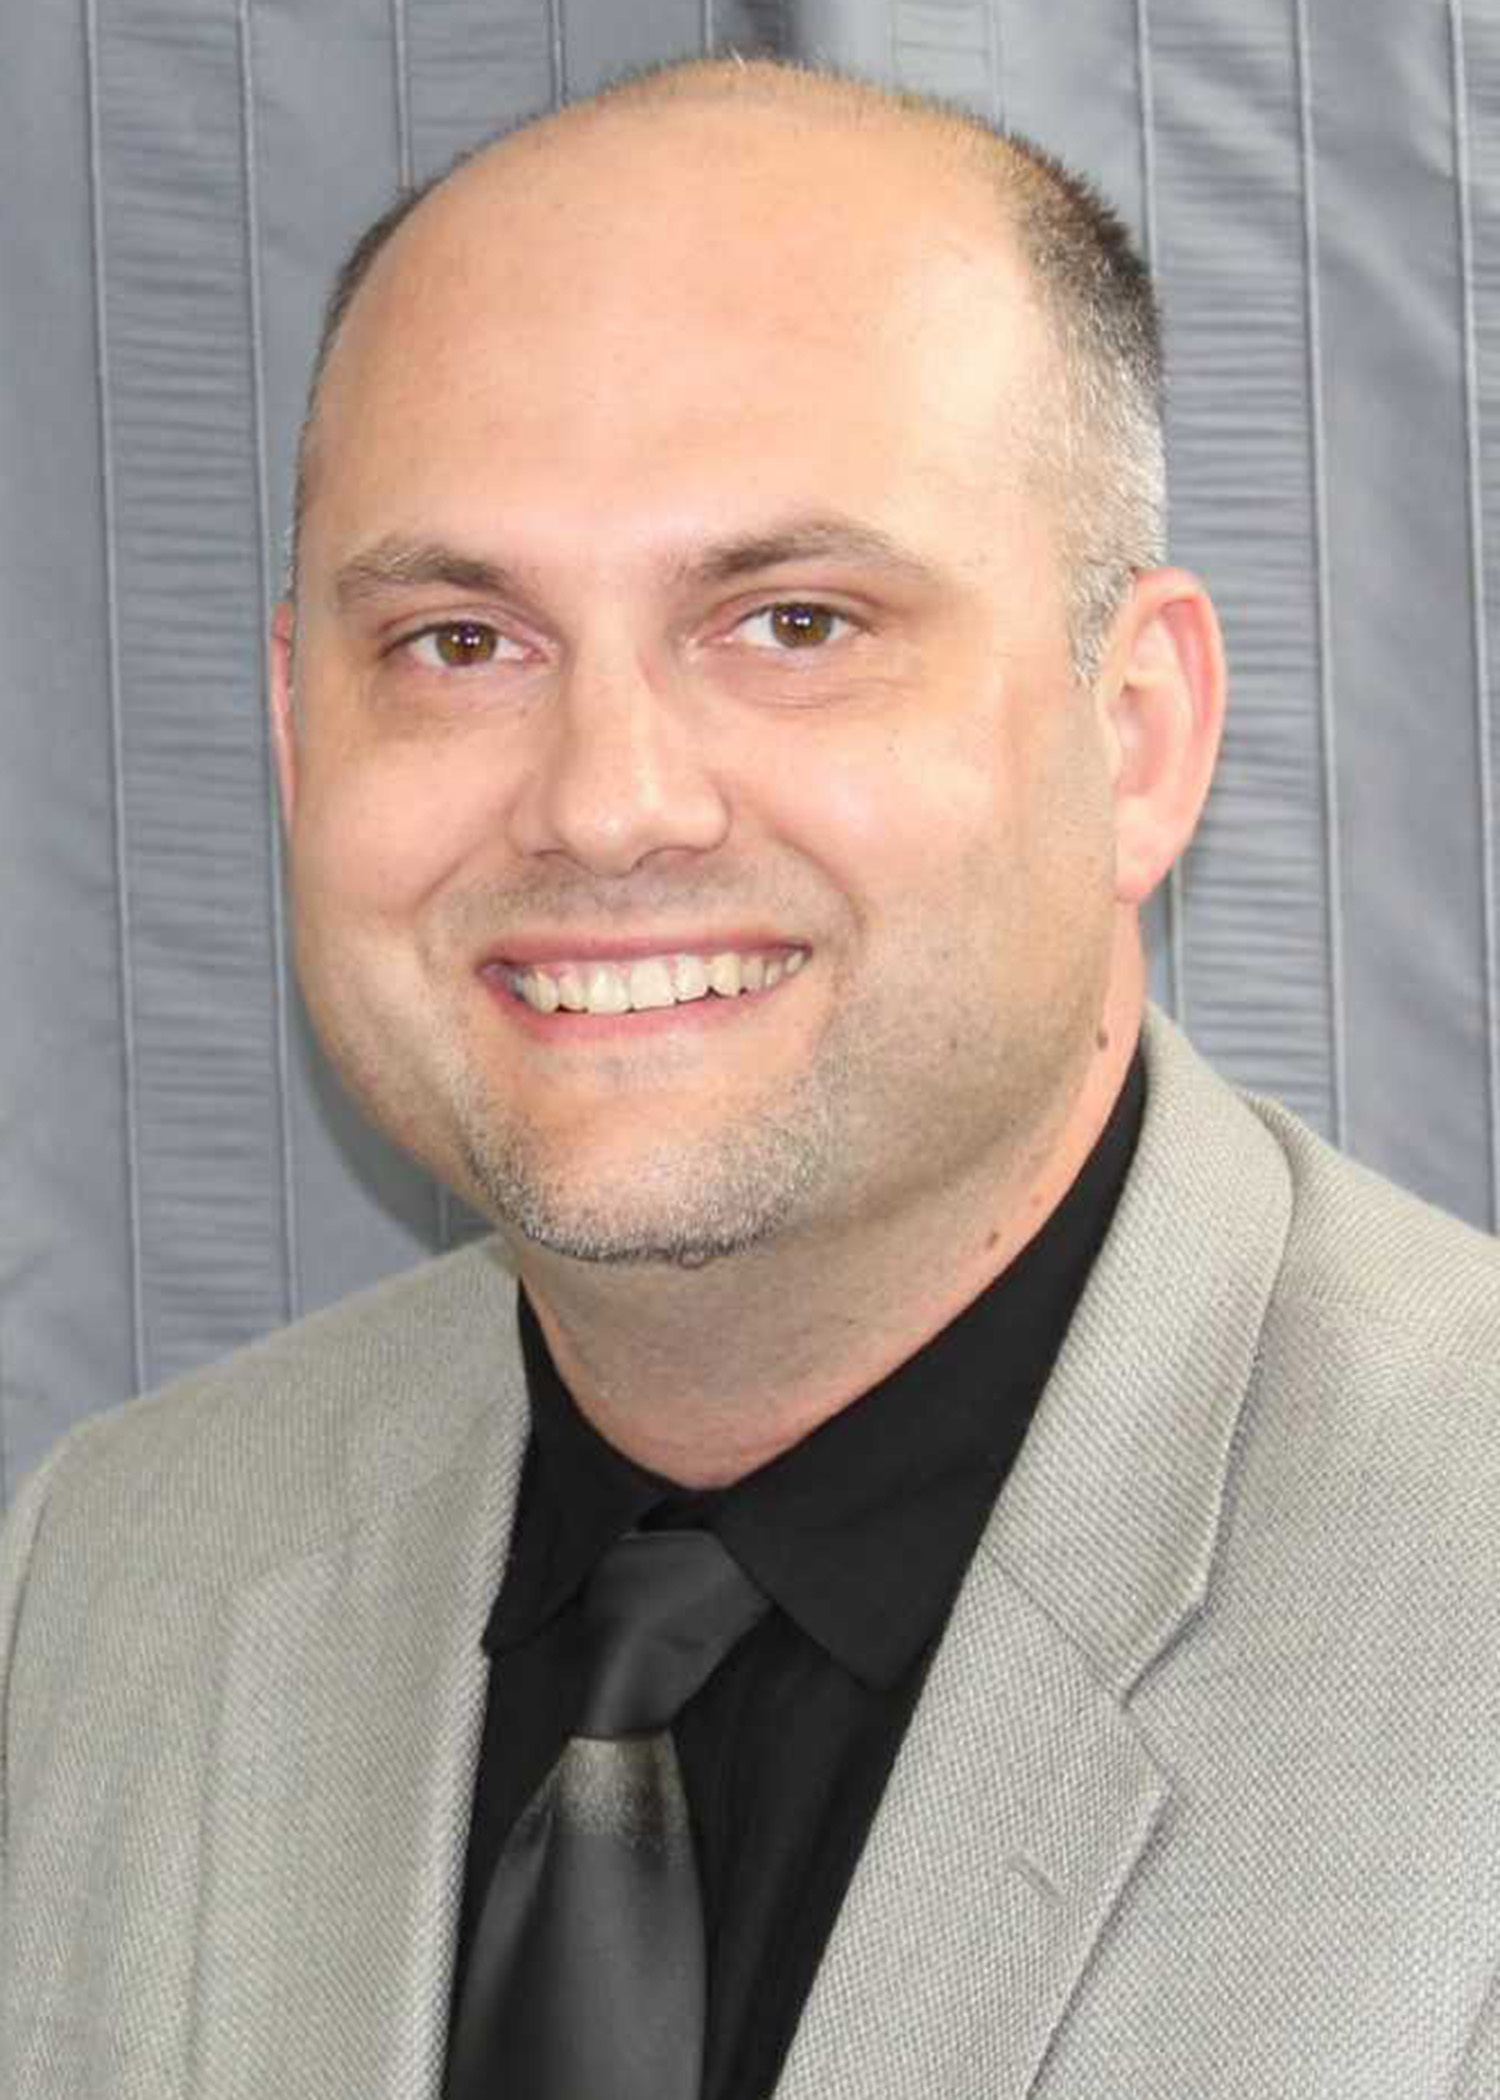 SWU has named Dan Moore new Chief Technology Officer.